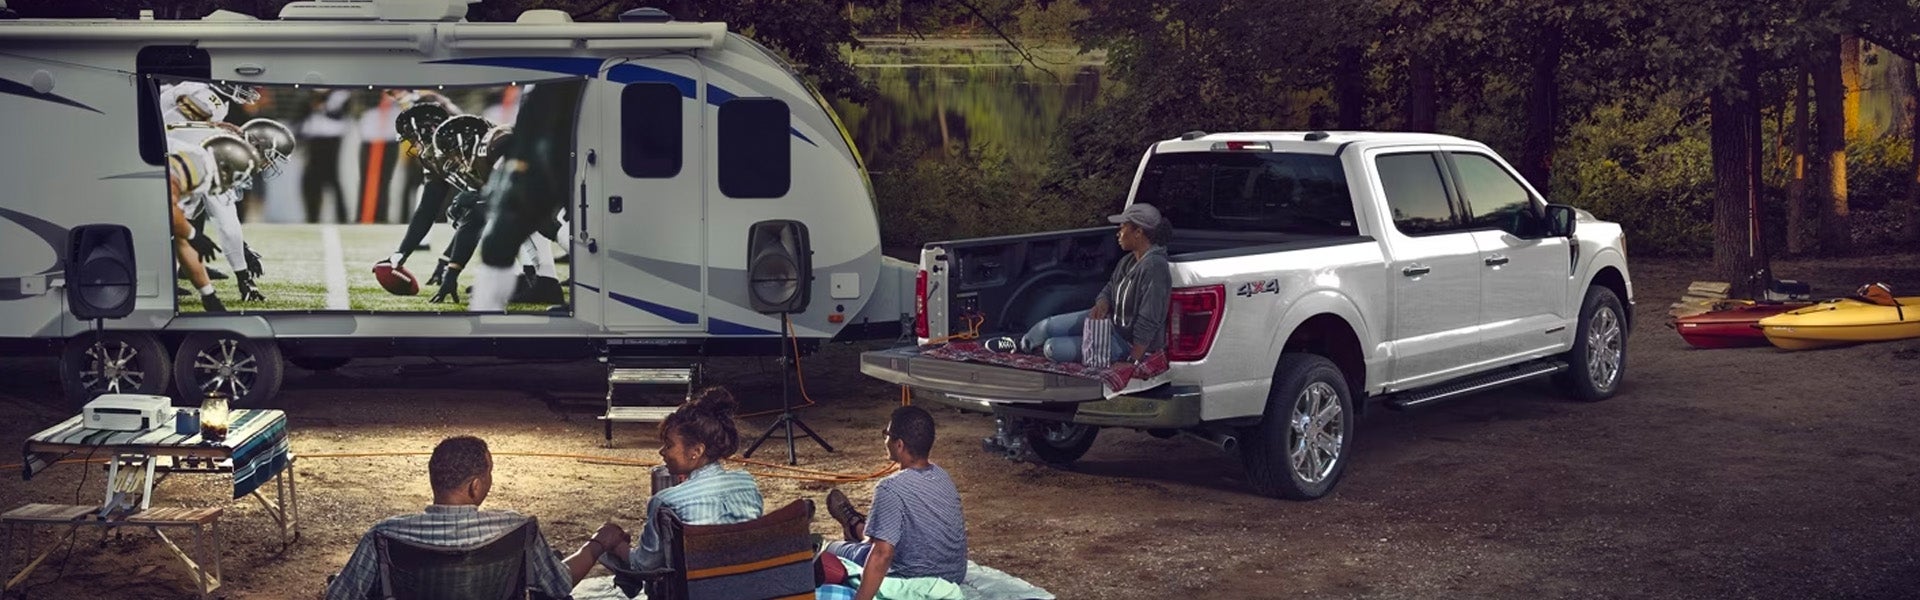 Ford F-150 with full camping gear and trailer